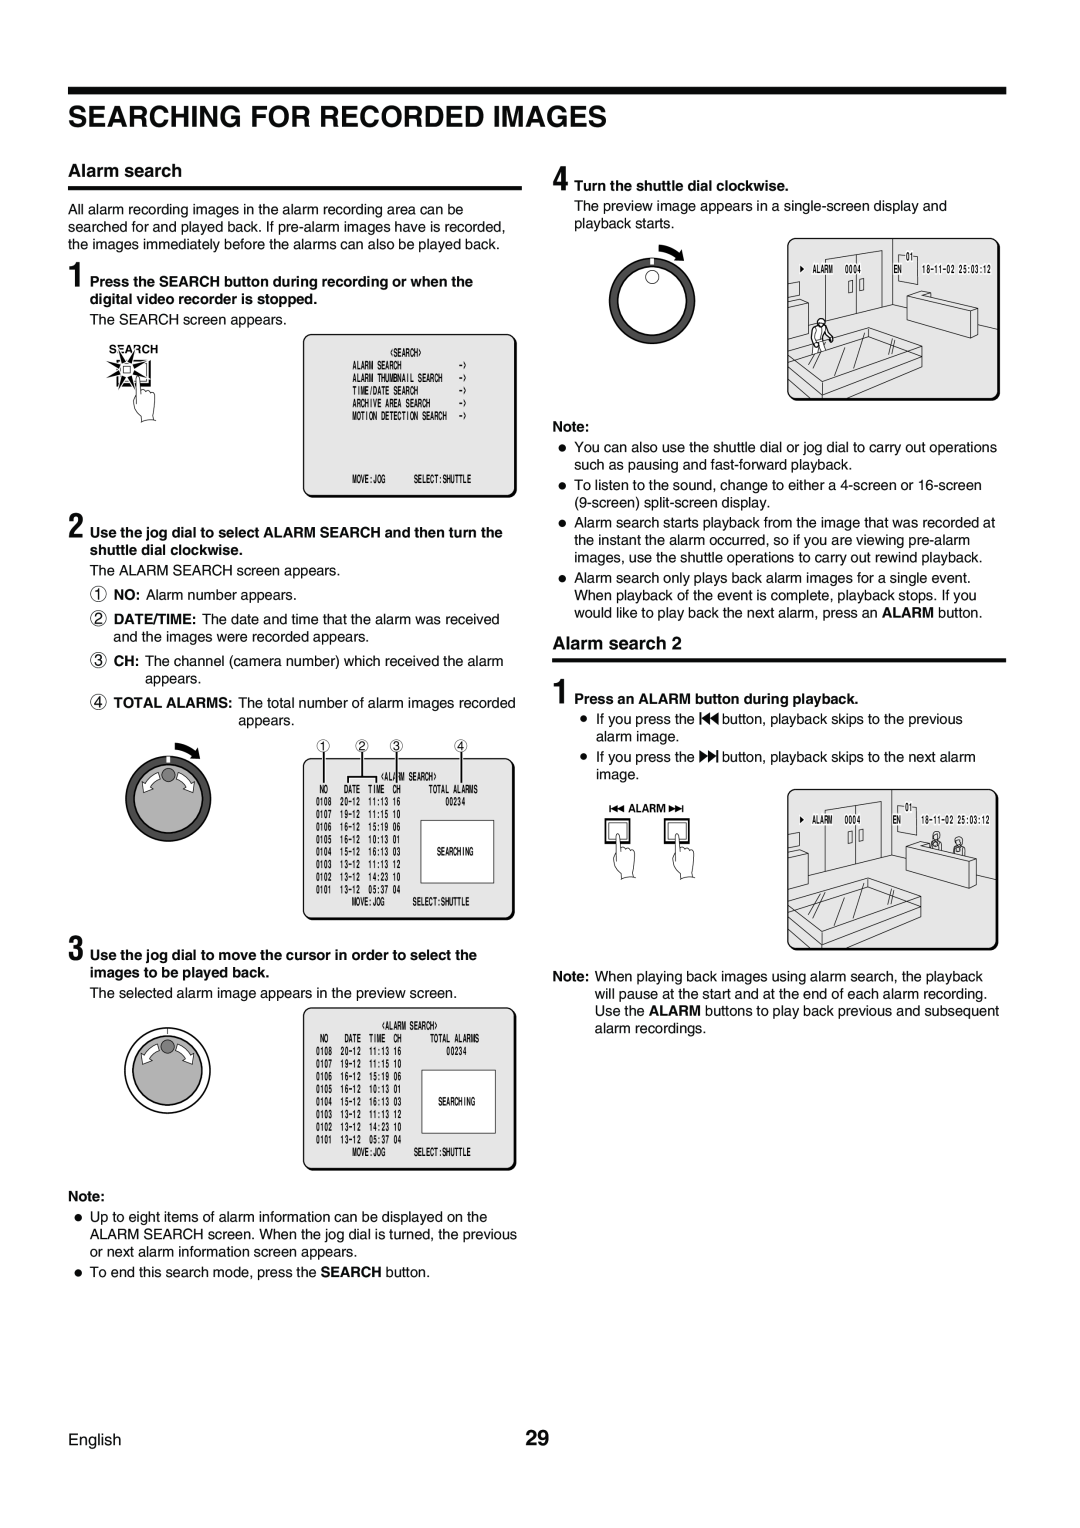 Sanyo DSR-3009P instruction manual Searching For Recorded Images, Alarm search 